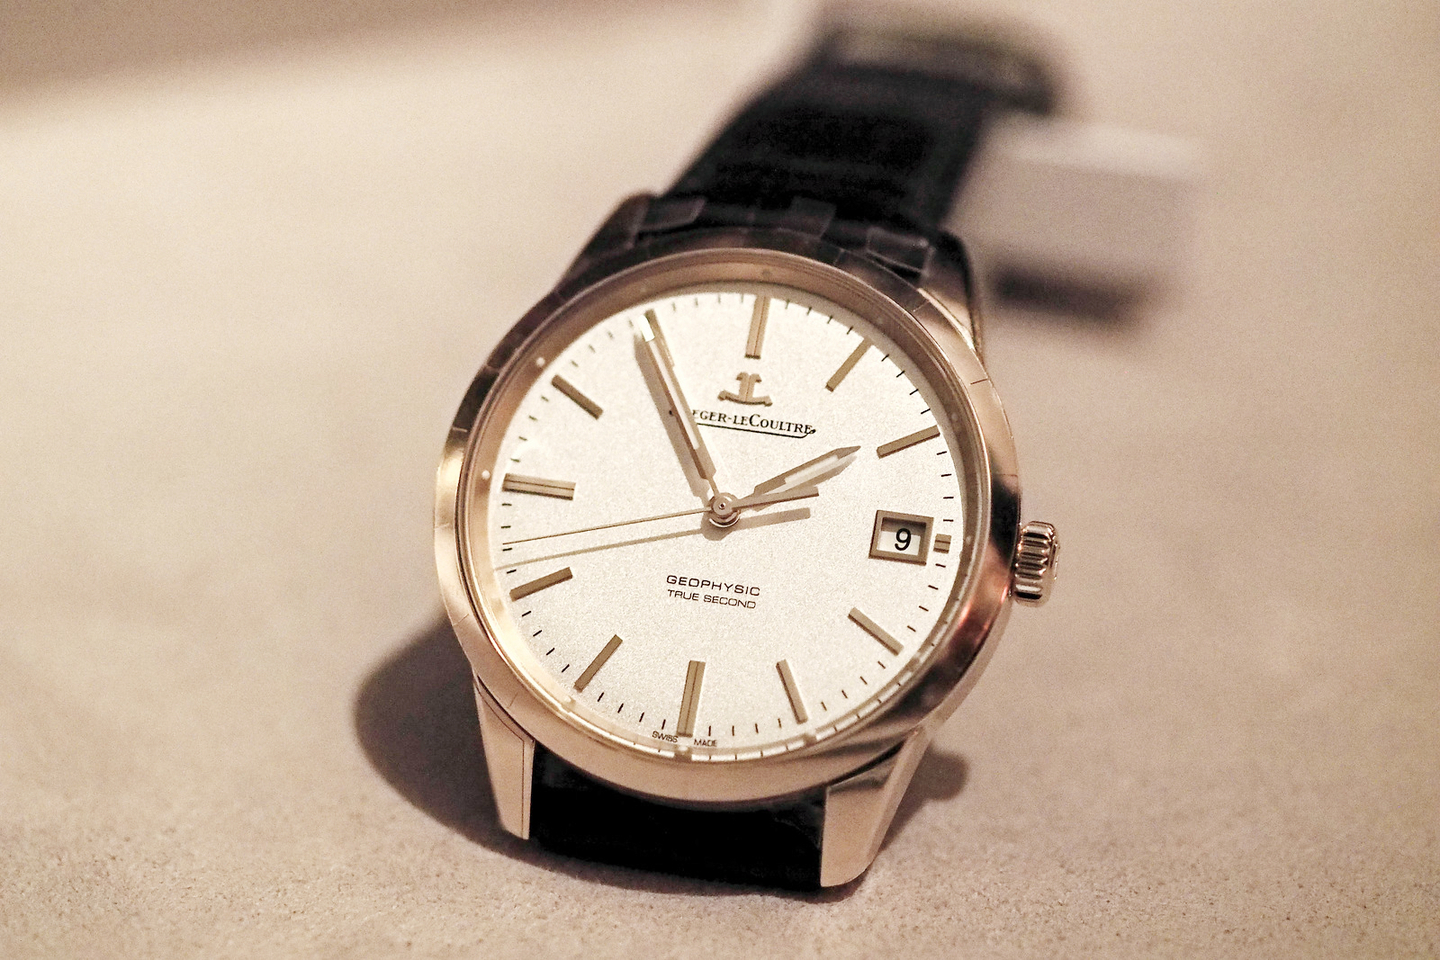 The new Jaeger-LeCoultre Geophysic “True Second” and “Universal Time” Hands-On